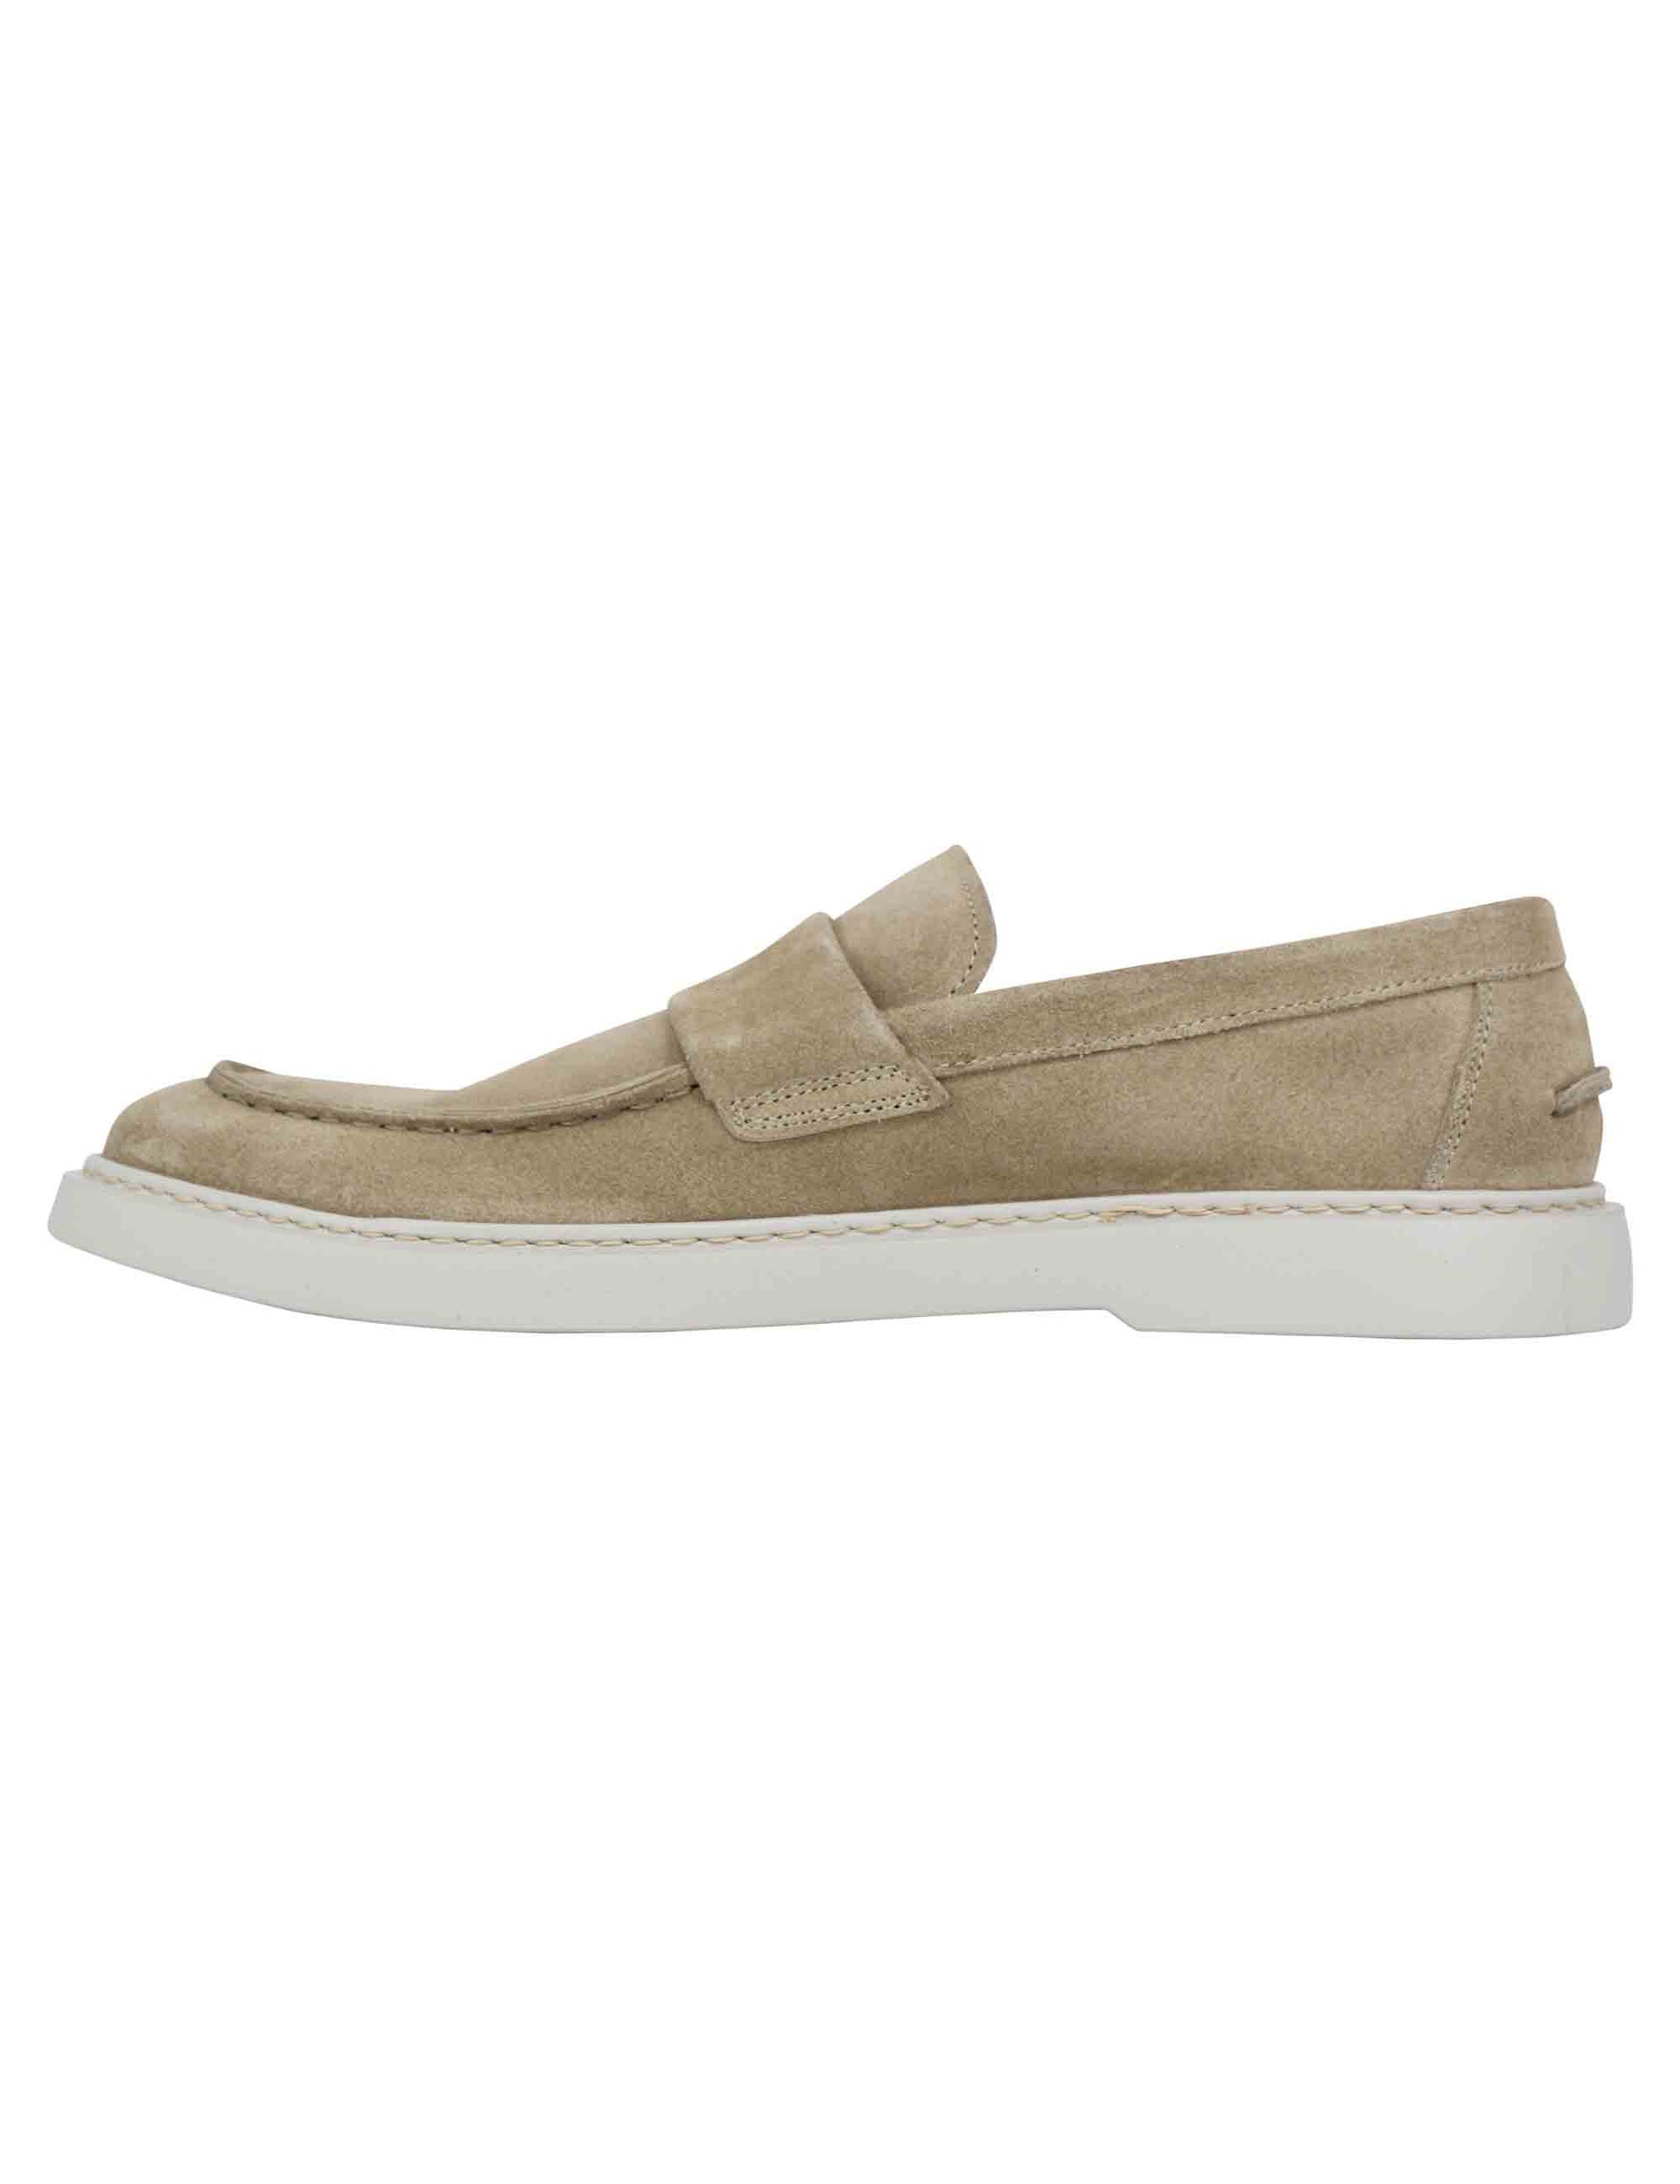 Men's beige suede loafers with white rubber sole